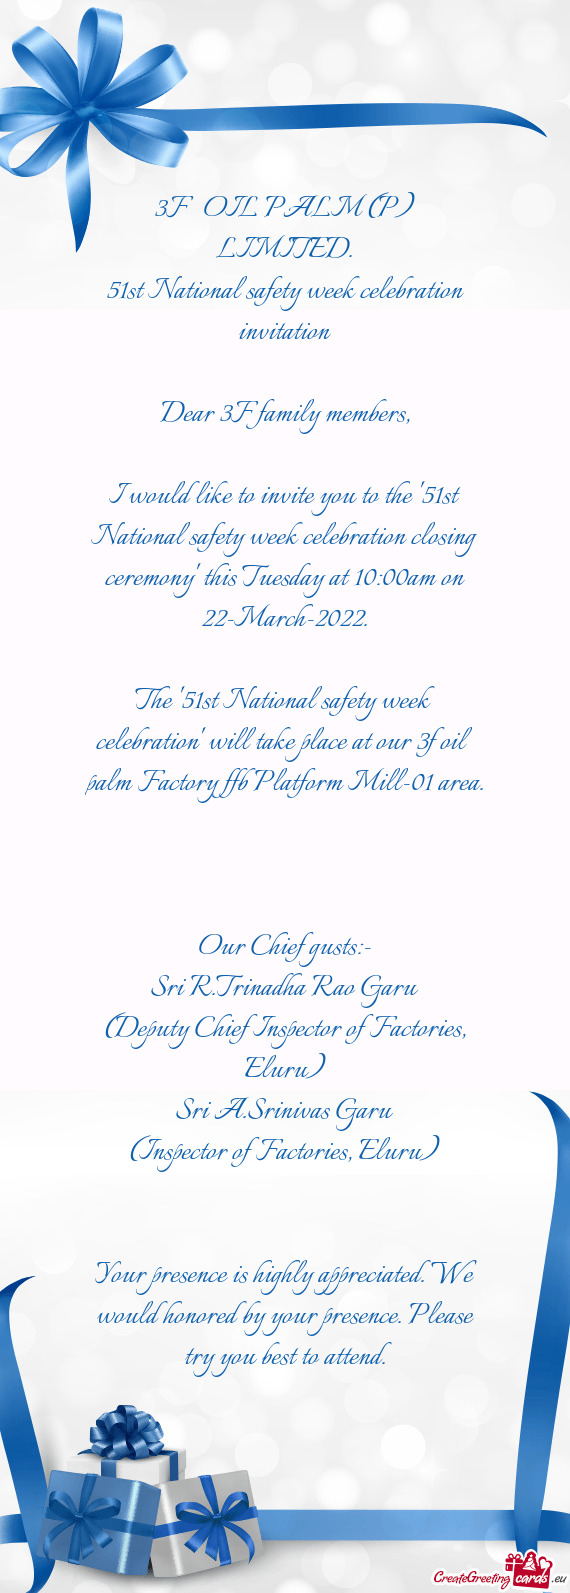 I would like to invite you to the "51st National safety week celebration closing ceremony" this Tues